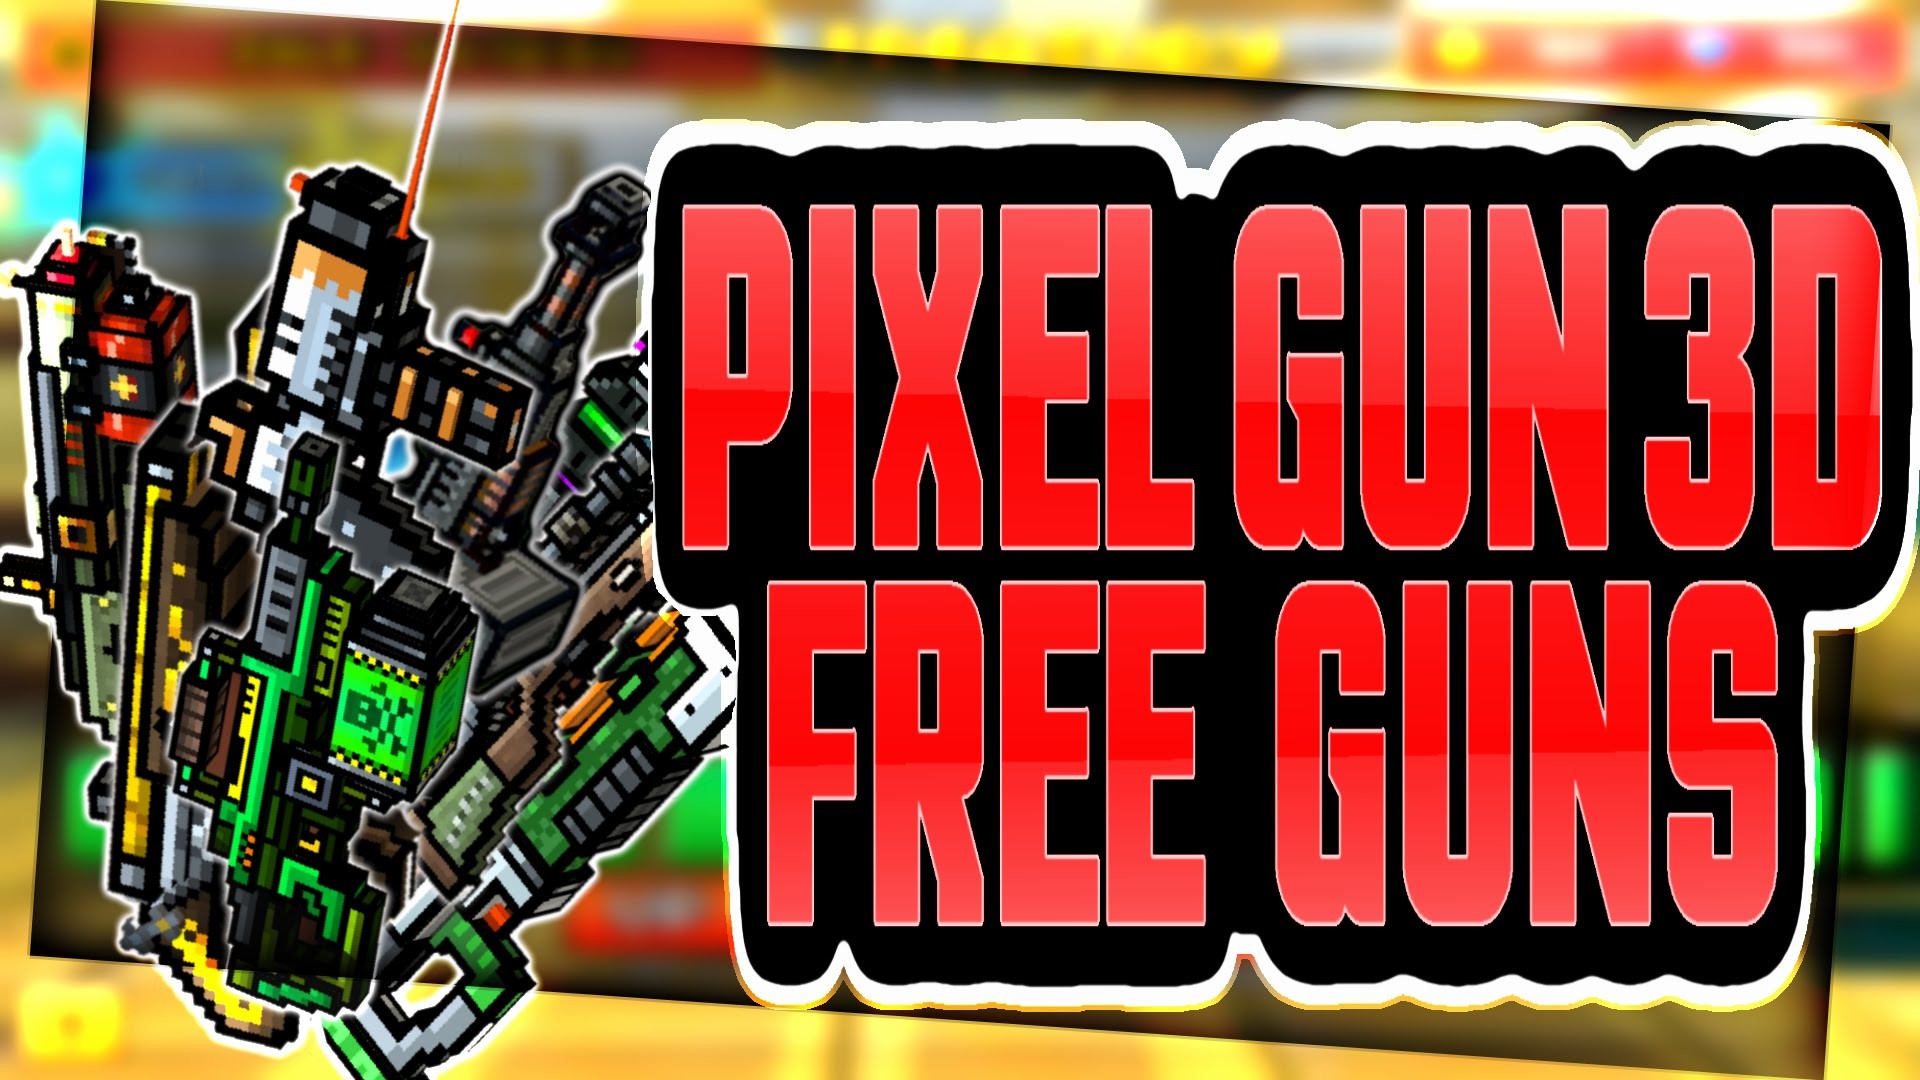 1920x1080 Pixel Gun 3D - HOW TO GET FREE GUNS! - GET ANY GUN FOR FREE!!!! (GLITCH)  100% REAL - YouTube